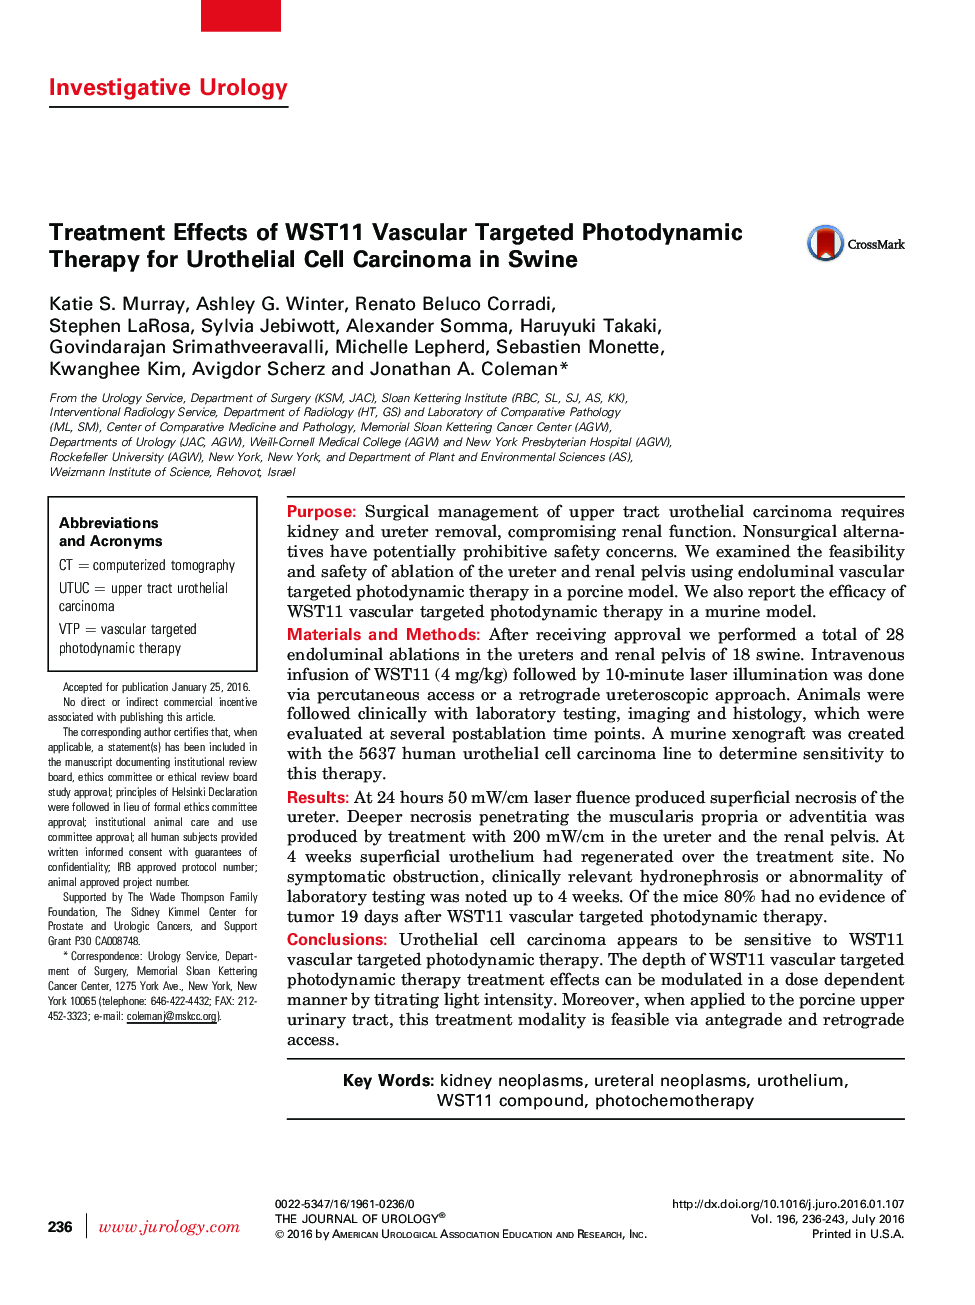 Treatment Effects of WST11 Vascular Targeted Photodynamic Therapy for Urothelial Cell Carcinoma in Swine 